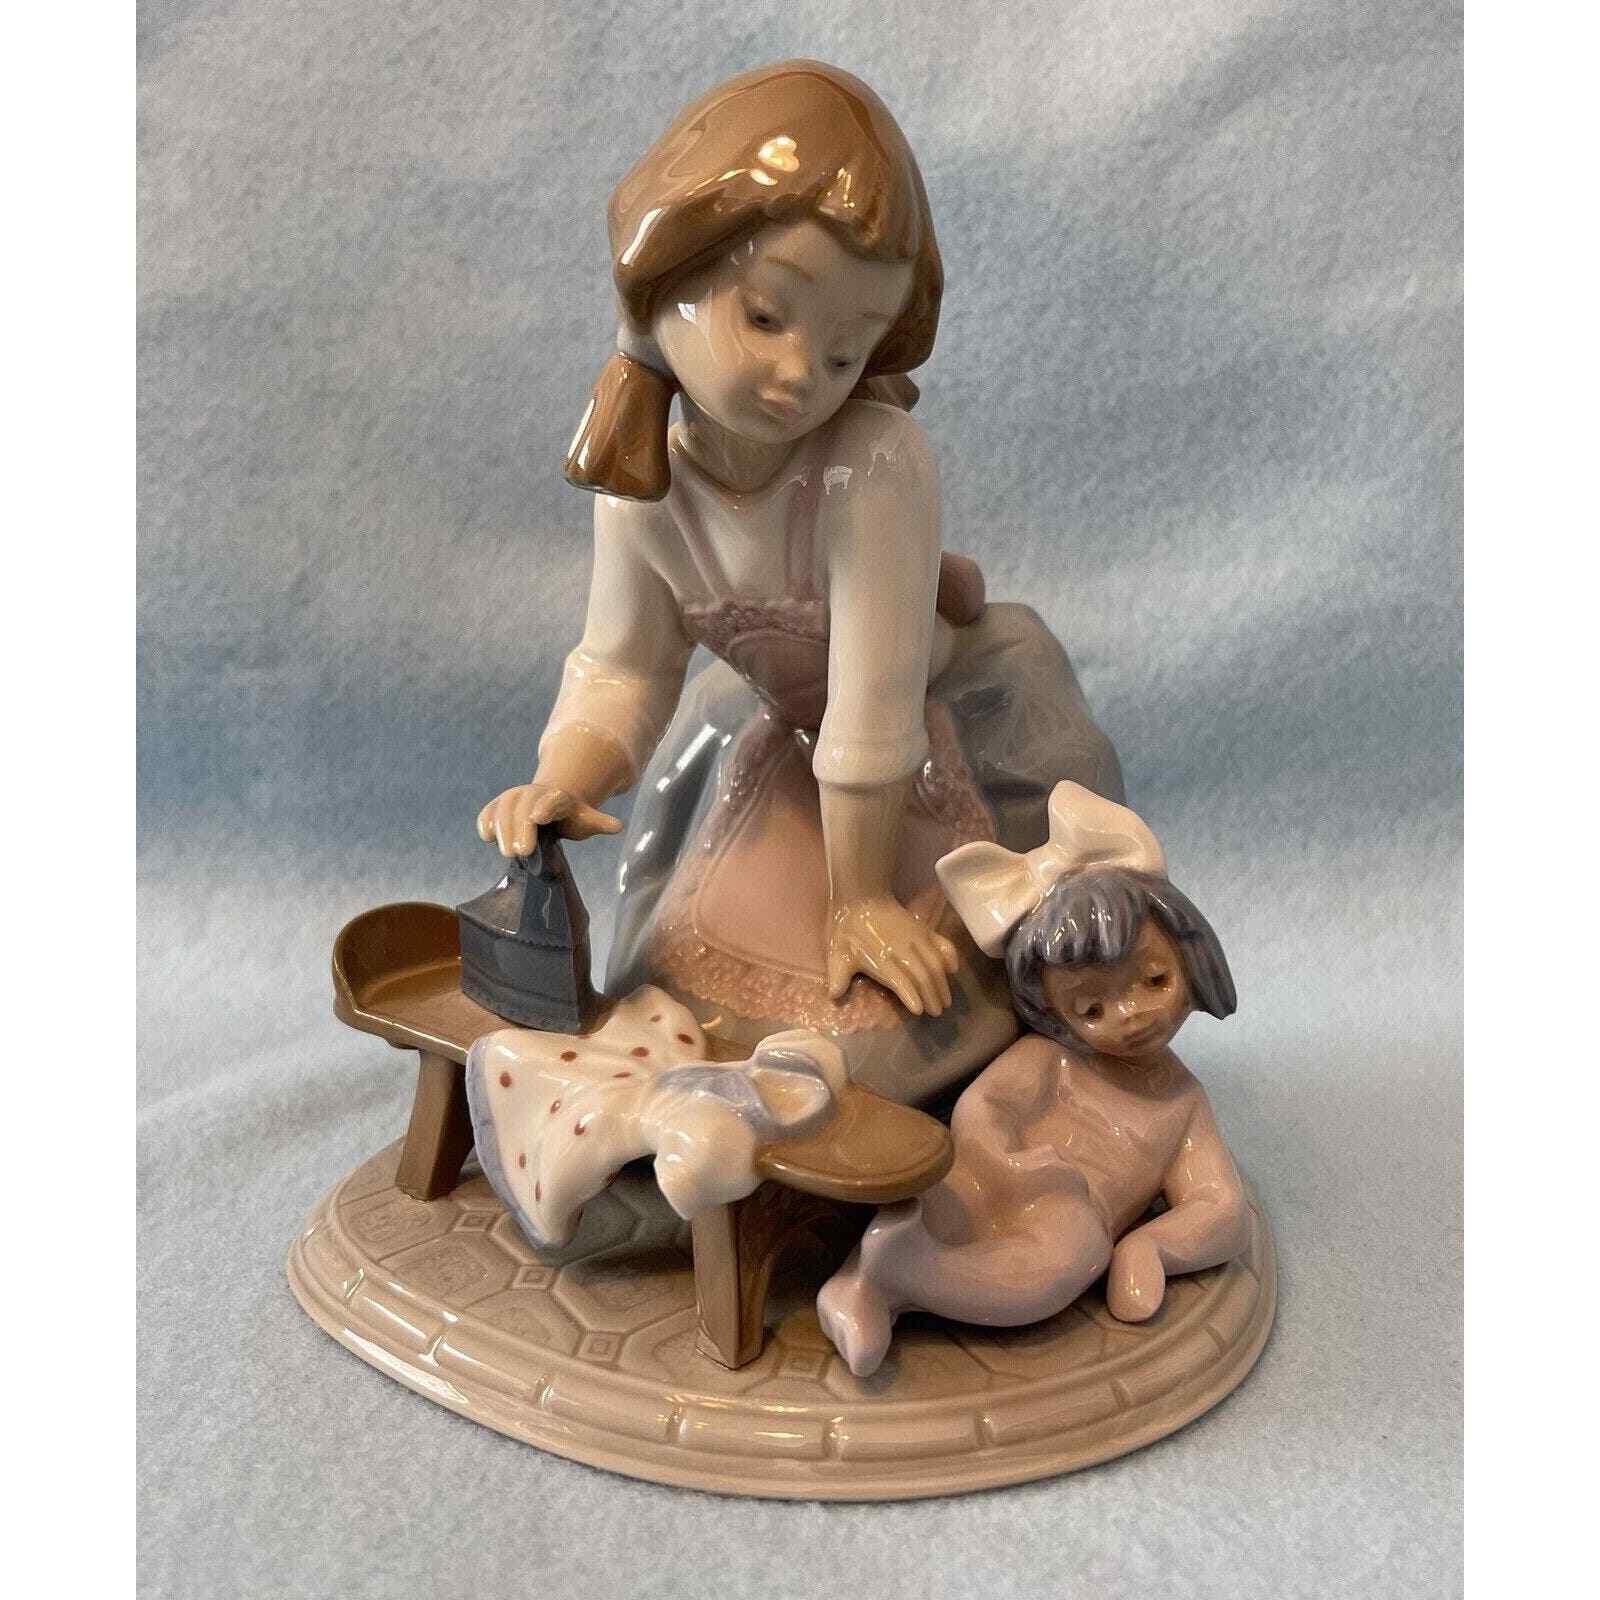 LLADRO #5782 My Chores Figurine - Spain, Retired Sculpture Collection Gift